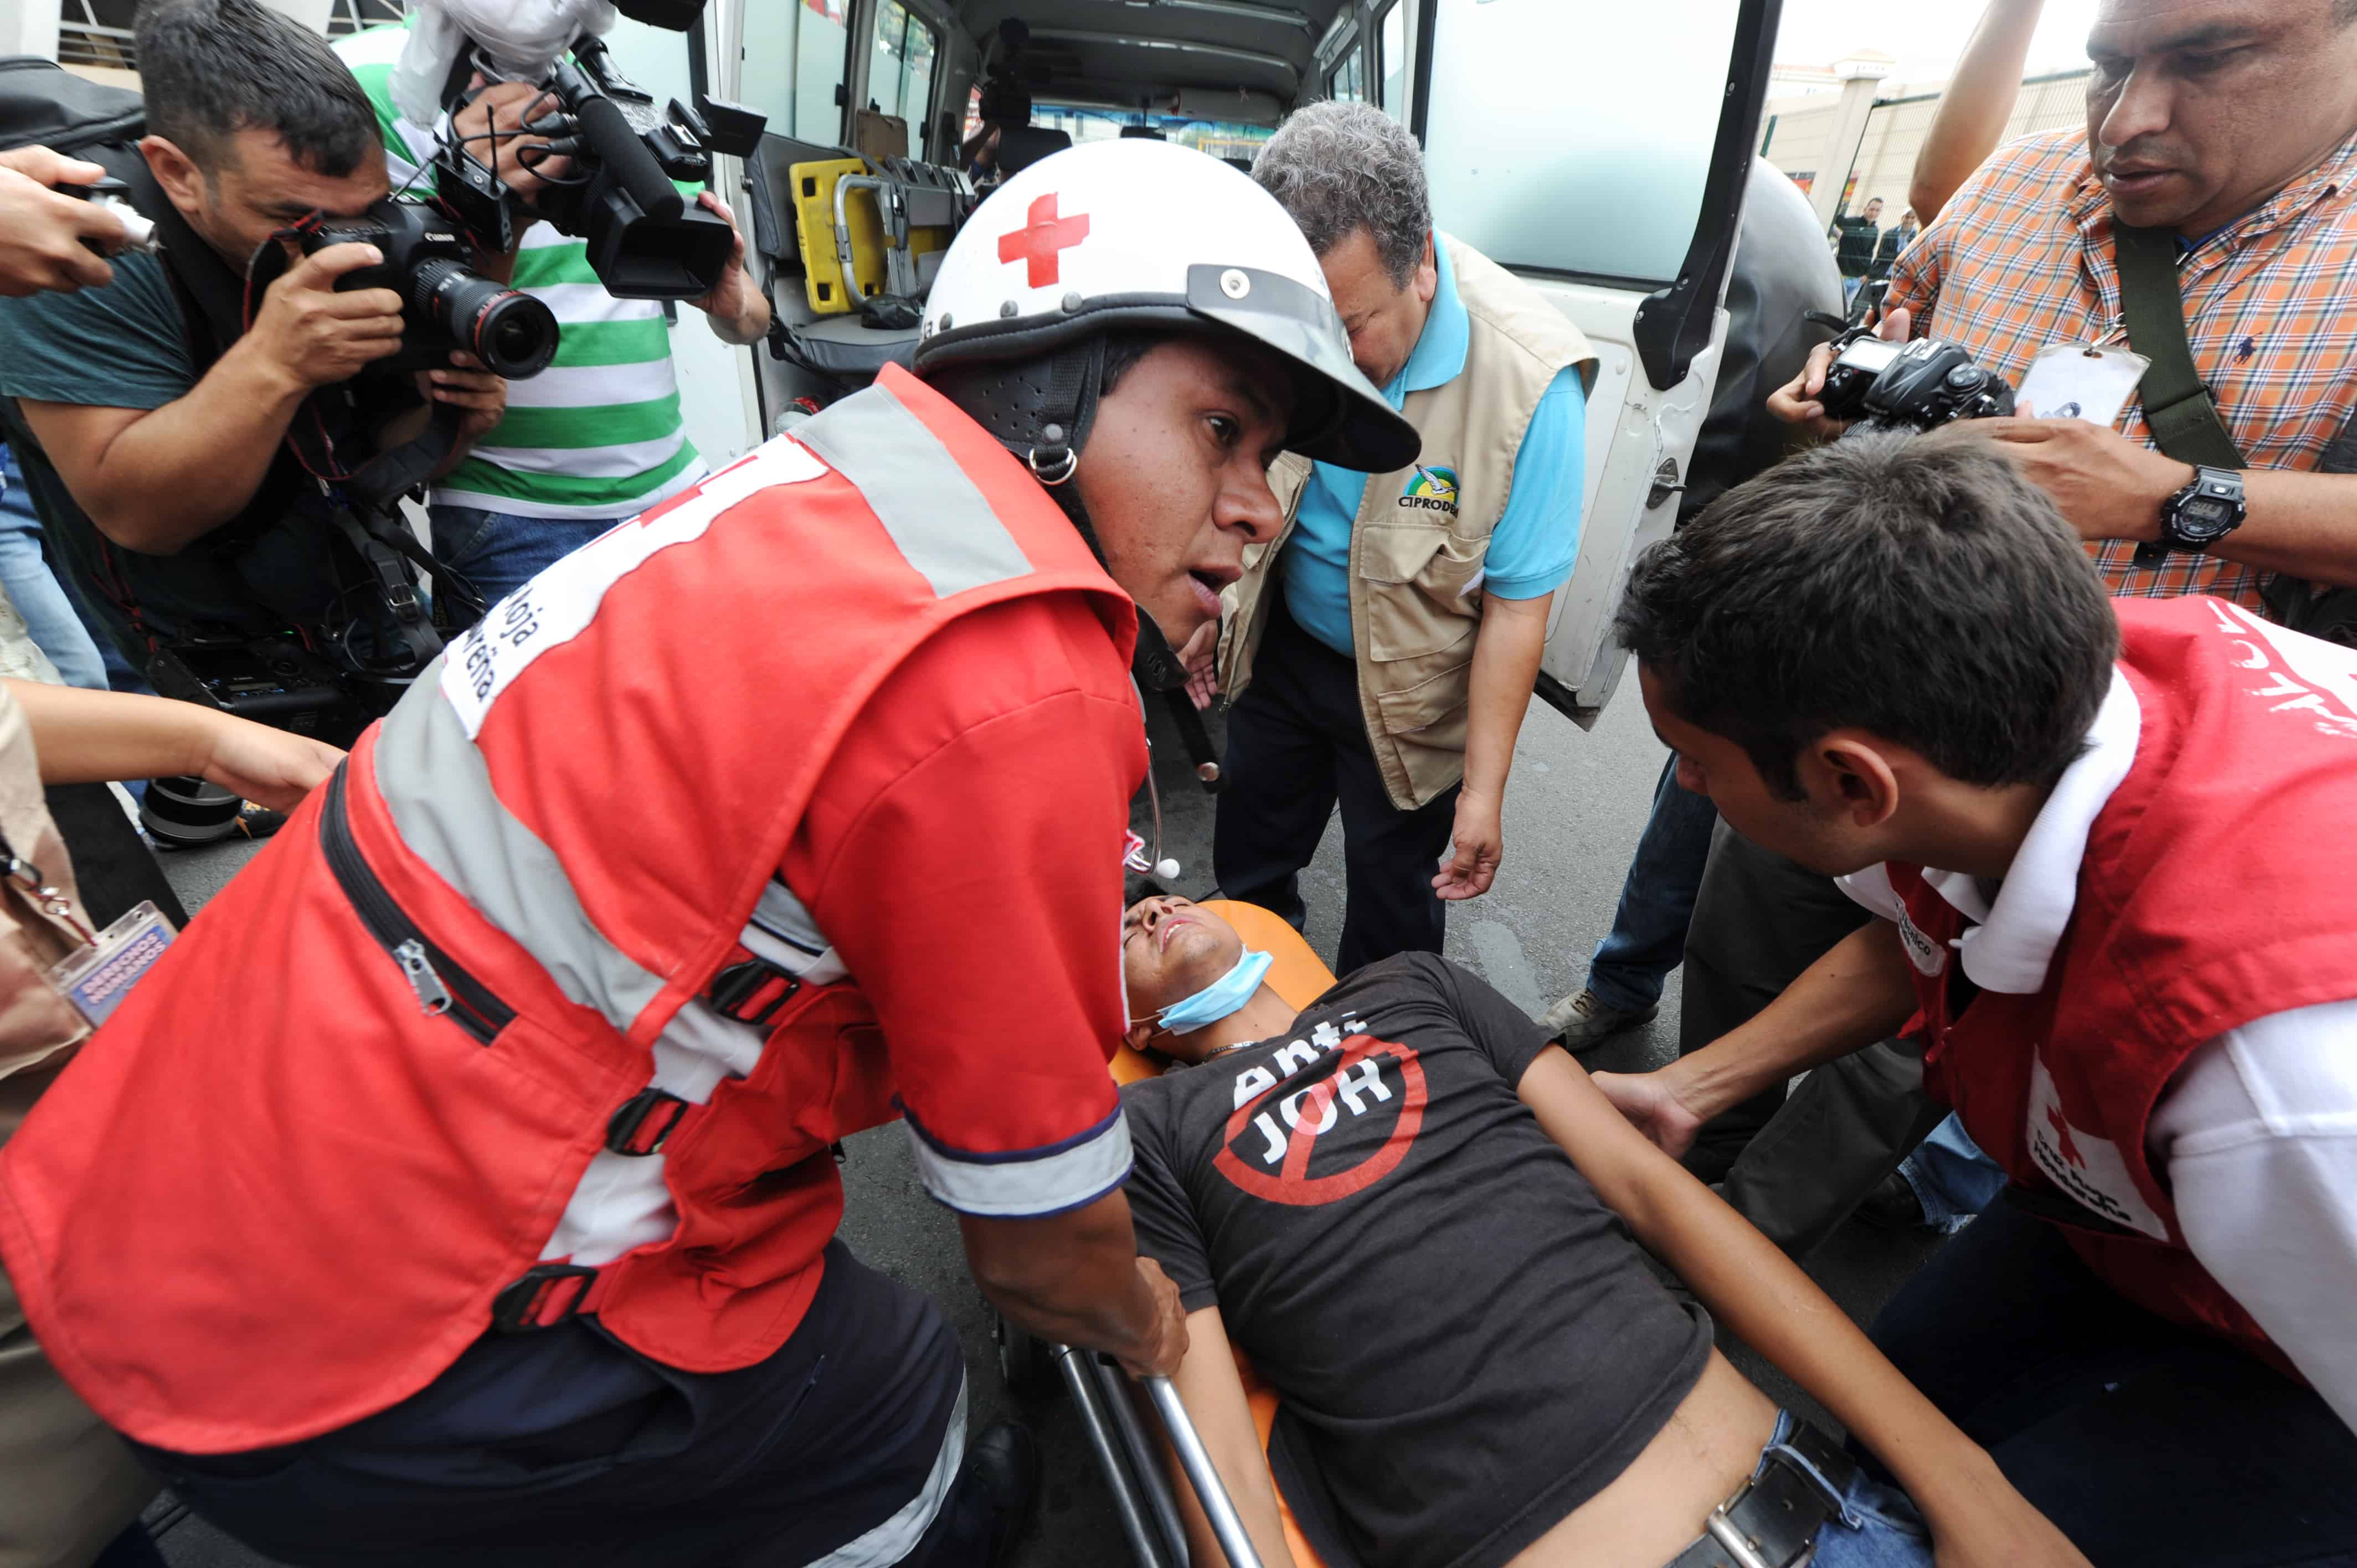 Red Cross members help a protester after he was hurt during clashes with the police in the surroundings of the Presidential Palace in Tegucigalpa, on July 16, 2015. At least 22 people on hunger strike, including Human Rights activist Wilfredo Mendez, demand the installation of an international commission against impunity in Honduras.